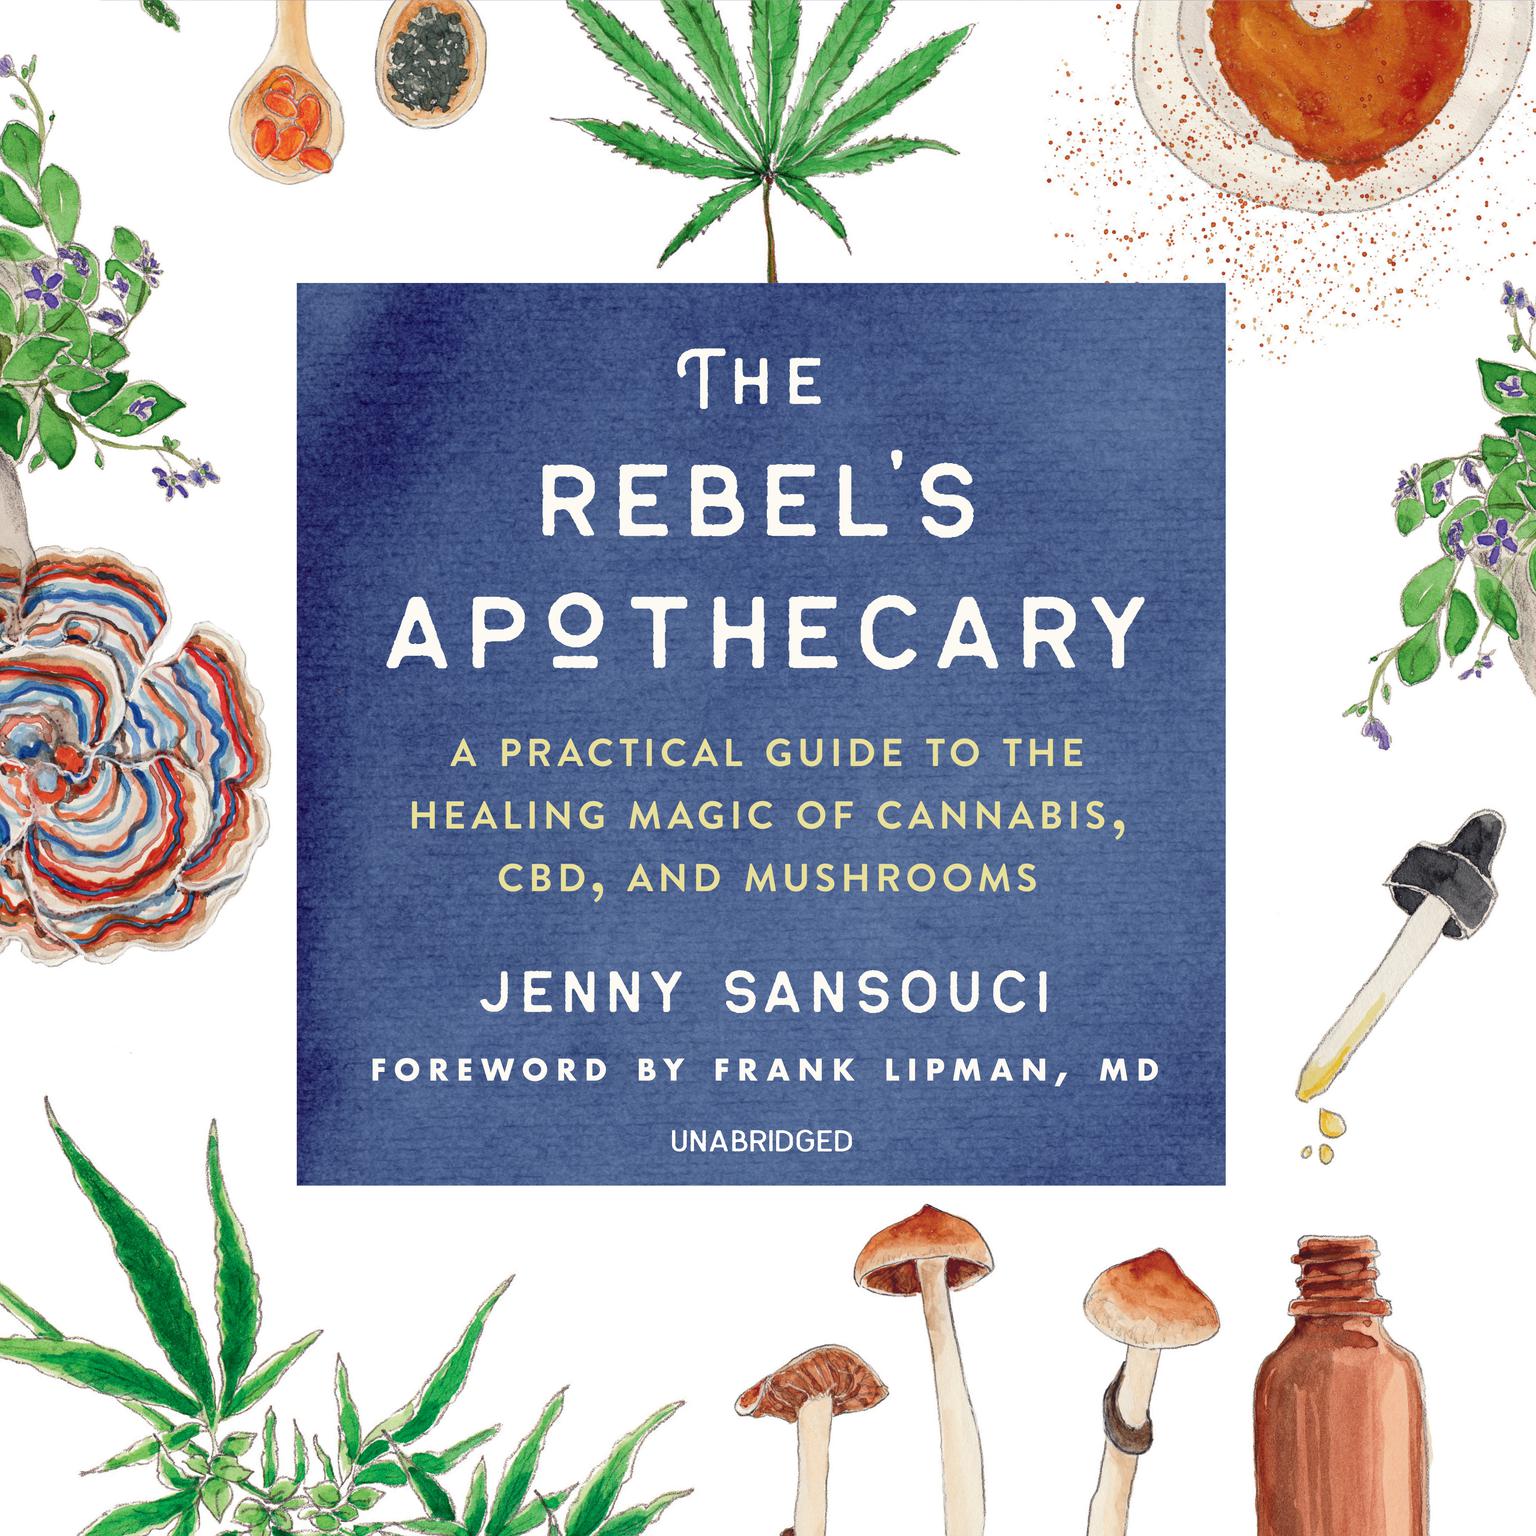 The Rebel’s Apothecary: A Practical Guide to the Healing Magic of Cannabis, CBD, and Mushrooms Audiobook, by Jenny Sansouci